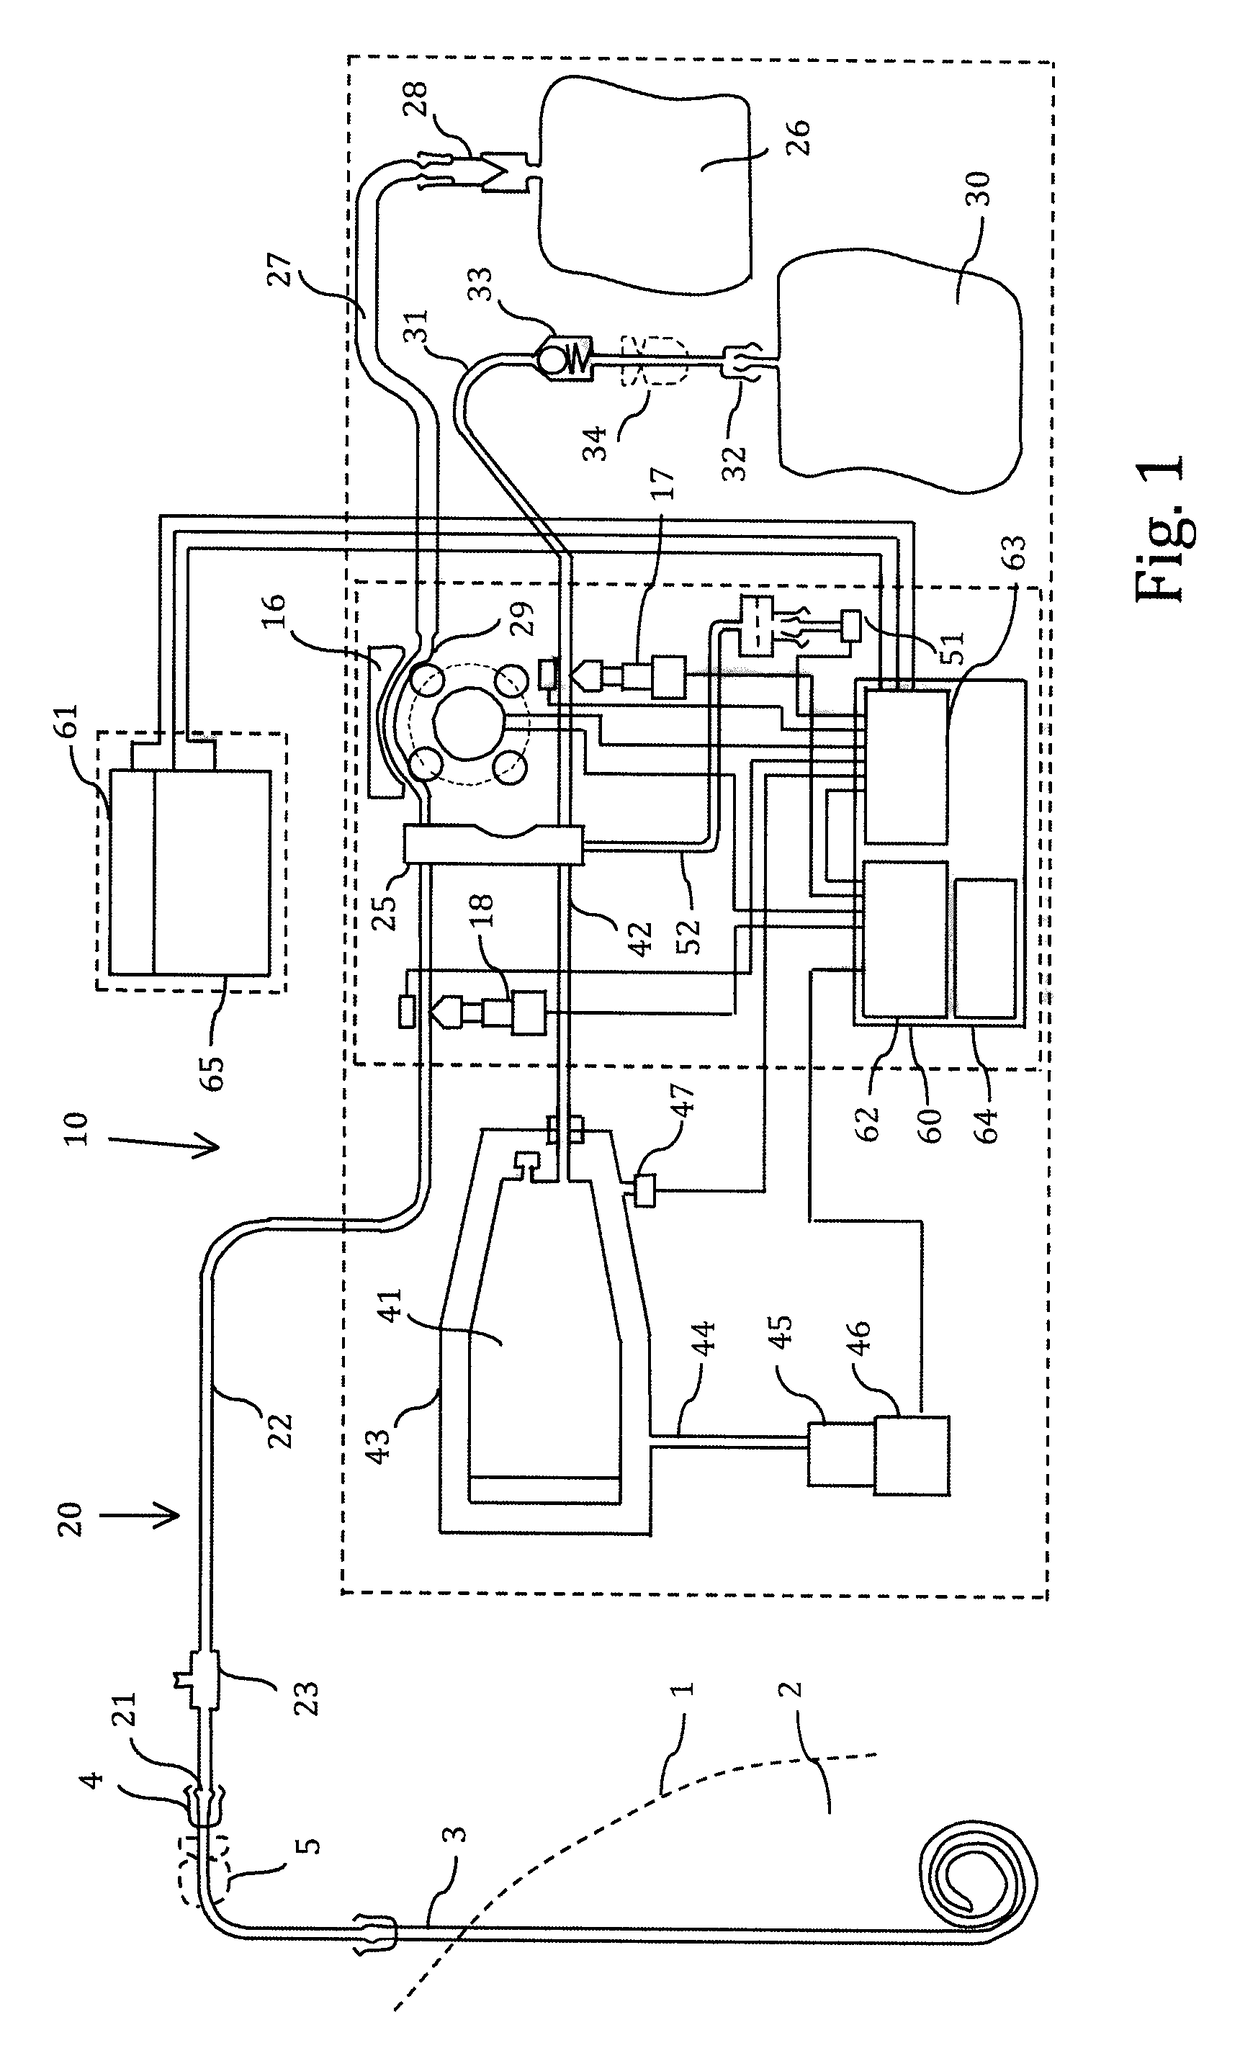 Apparatus for performing peritoneal ultrafiltration